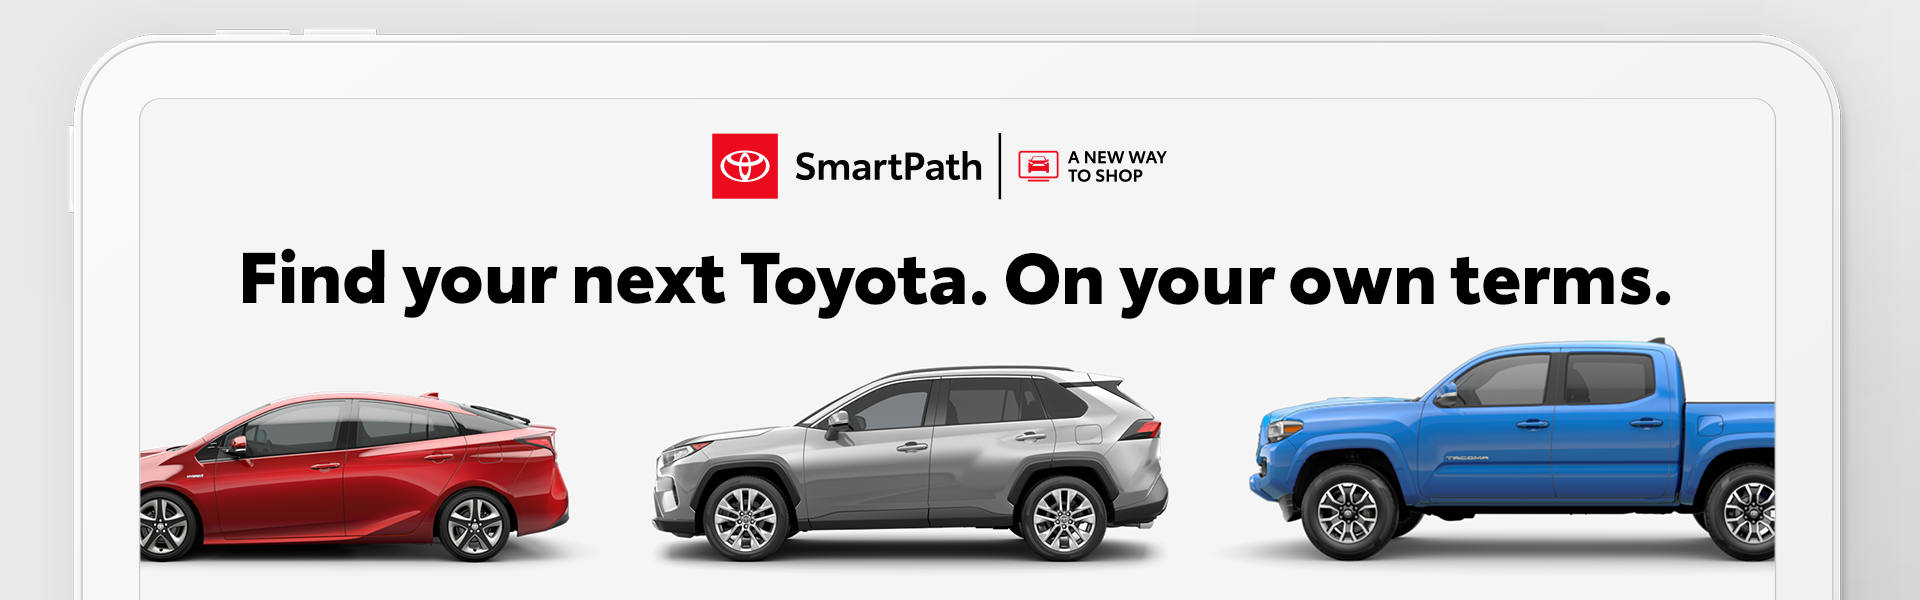 SP Banner Package - Find Your Next Toyota.zip